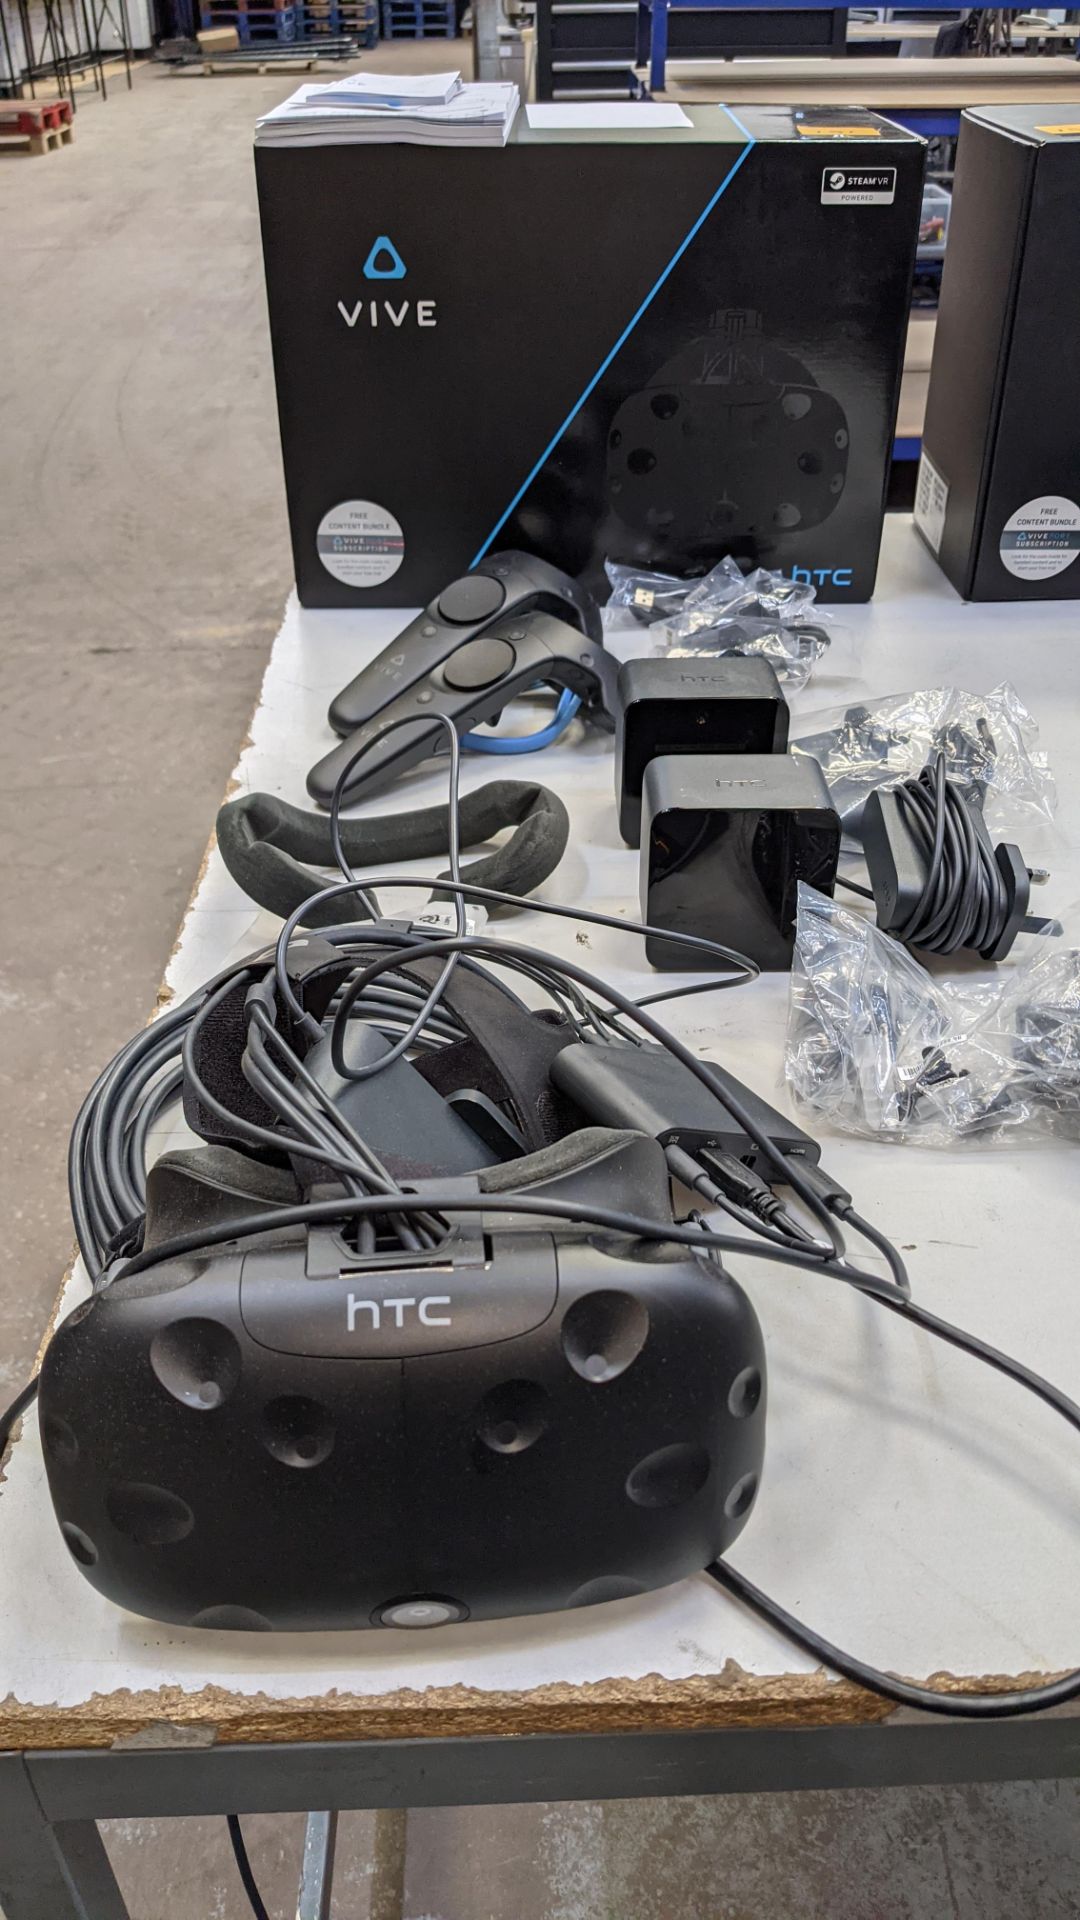 HTC Vive virtual reality kit comprising headset, controllers, base stations & more as pictured - Image 3 of 15